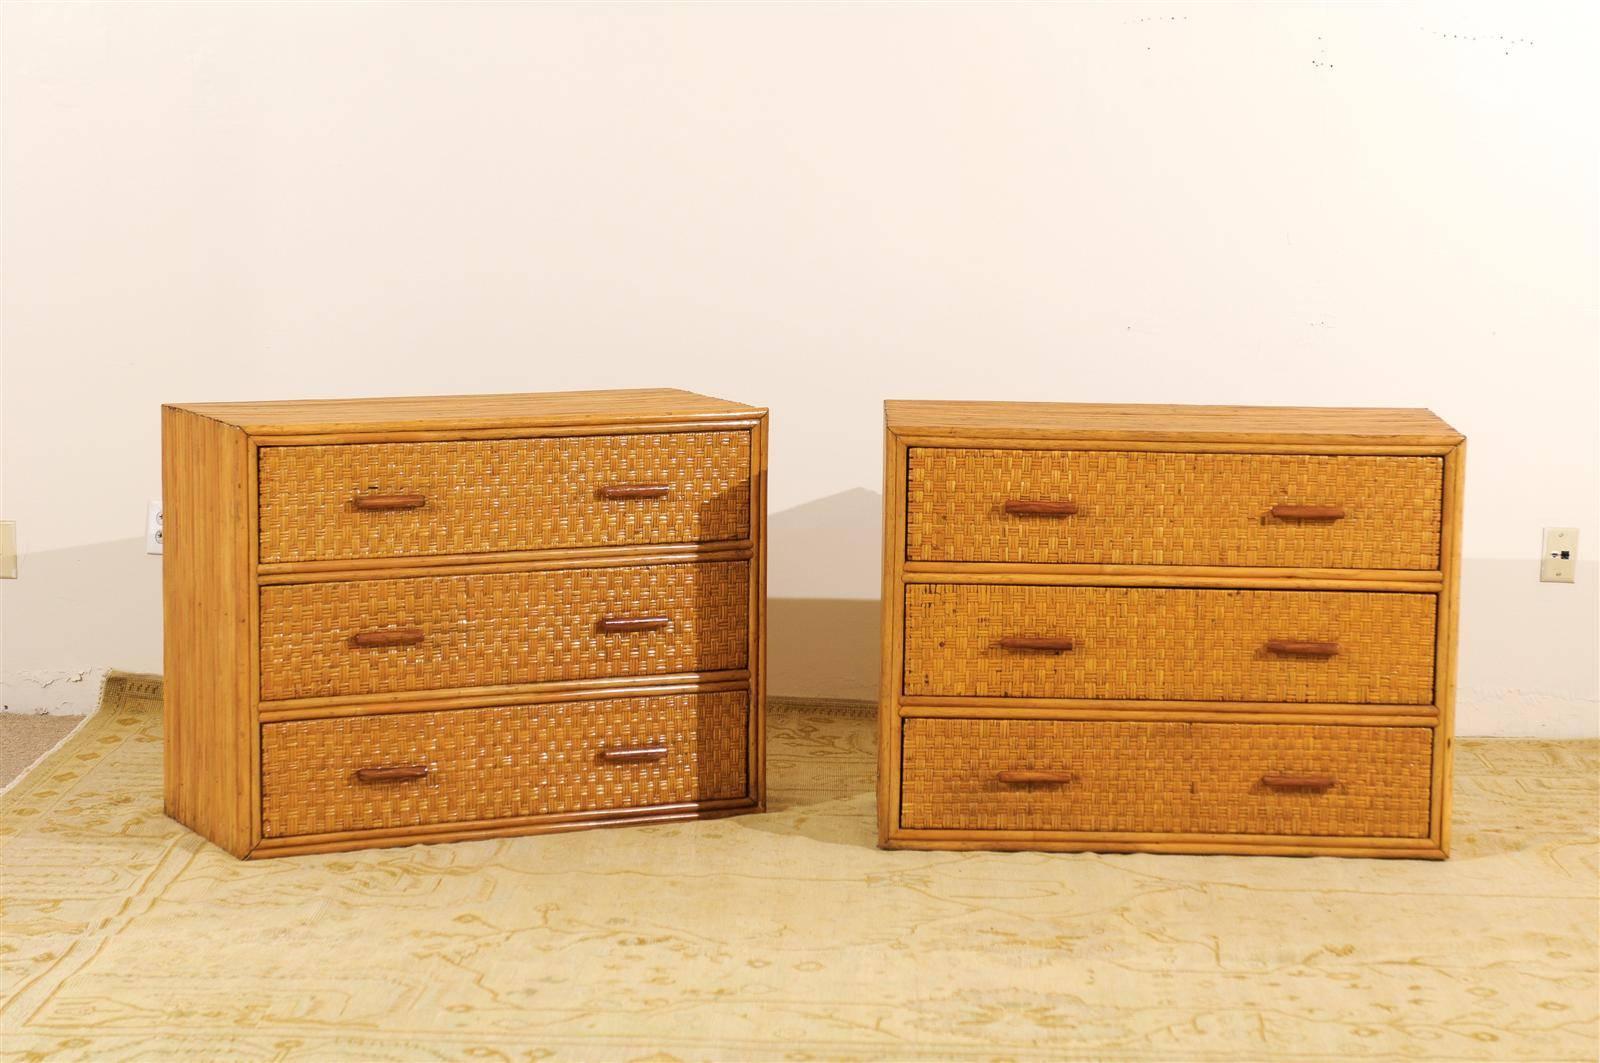 A lovely pair of vintage chests, circa 1950. Expertly crafted mahogany case construction, veneered in individual pieces of bamboo. Drawer fronts are covered in a rattan basket weave raffia. Beautiful detail and workmanship- aged to absolute